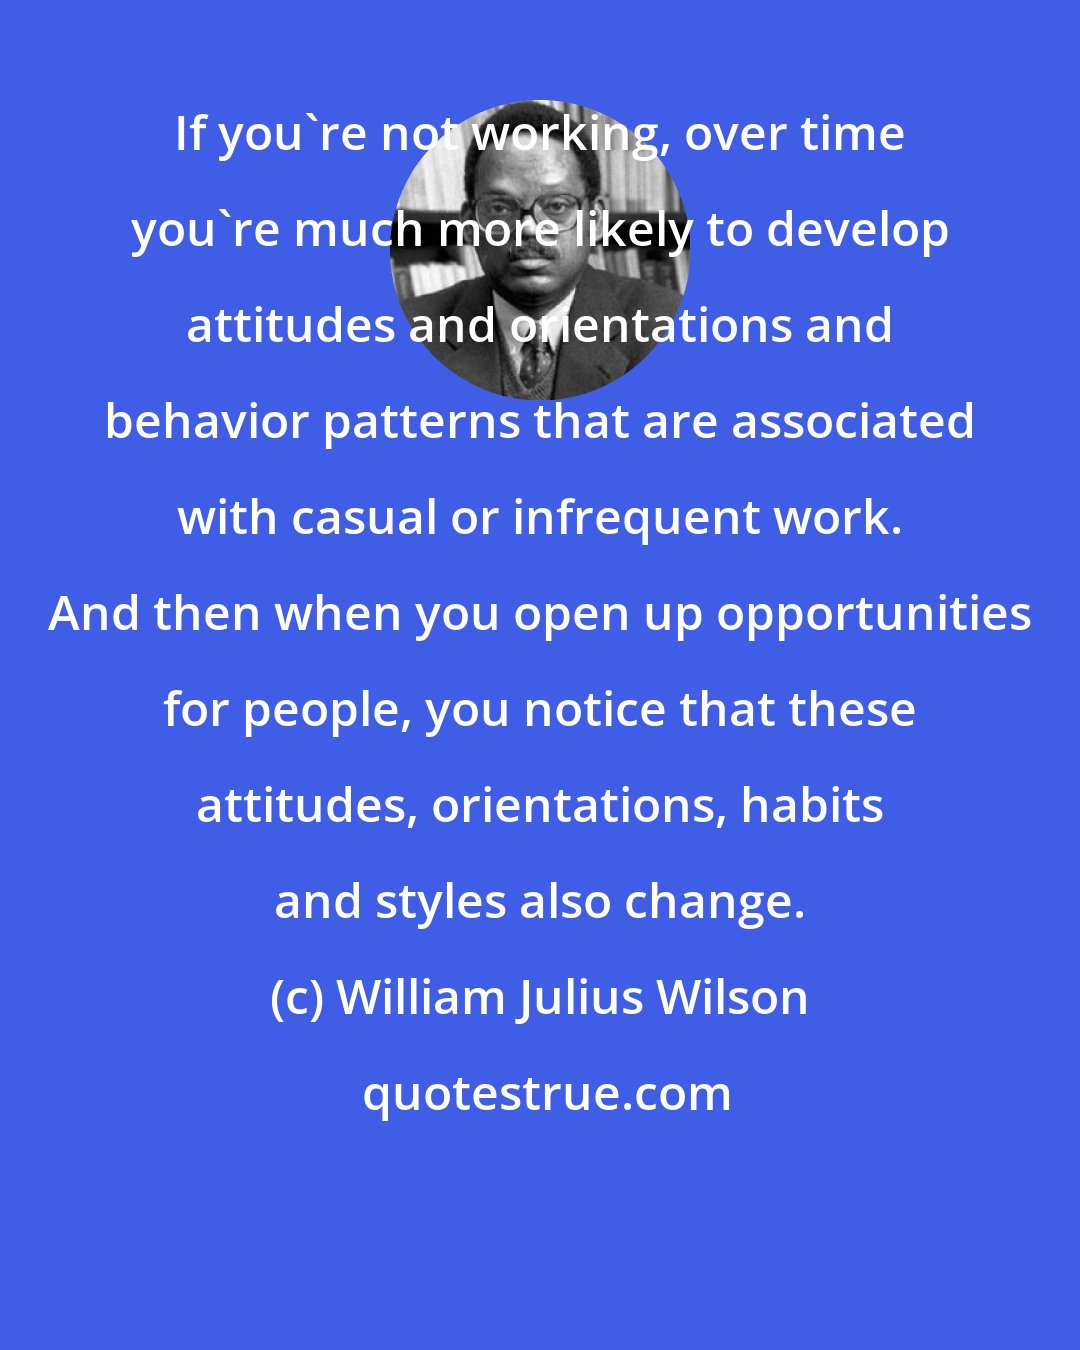 William Julius Wilson: If you're not working, over time you're much more likely to develop attitudes and orientations and behavior patterns that are associated with casual or infrequent work. And then when you open up opportunities for people, you notice that these attitudes, orientations, habits and styles also change.